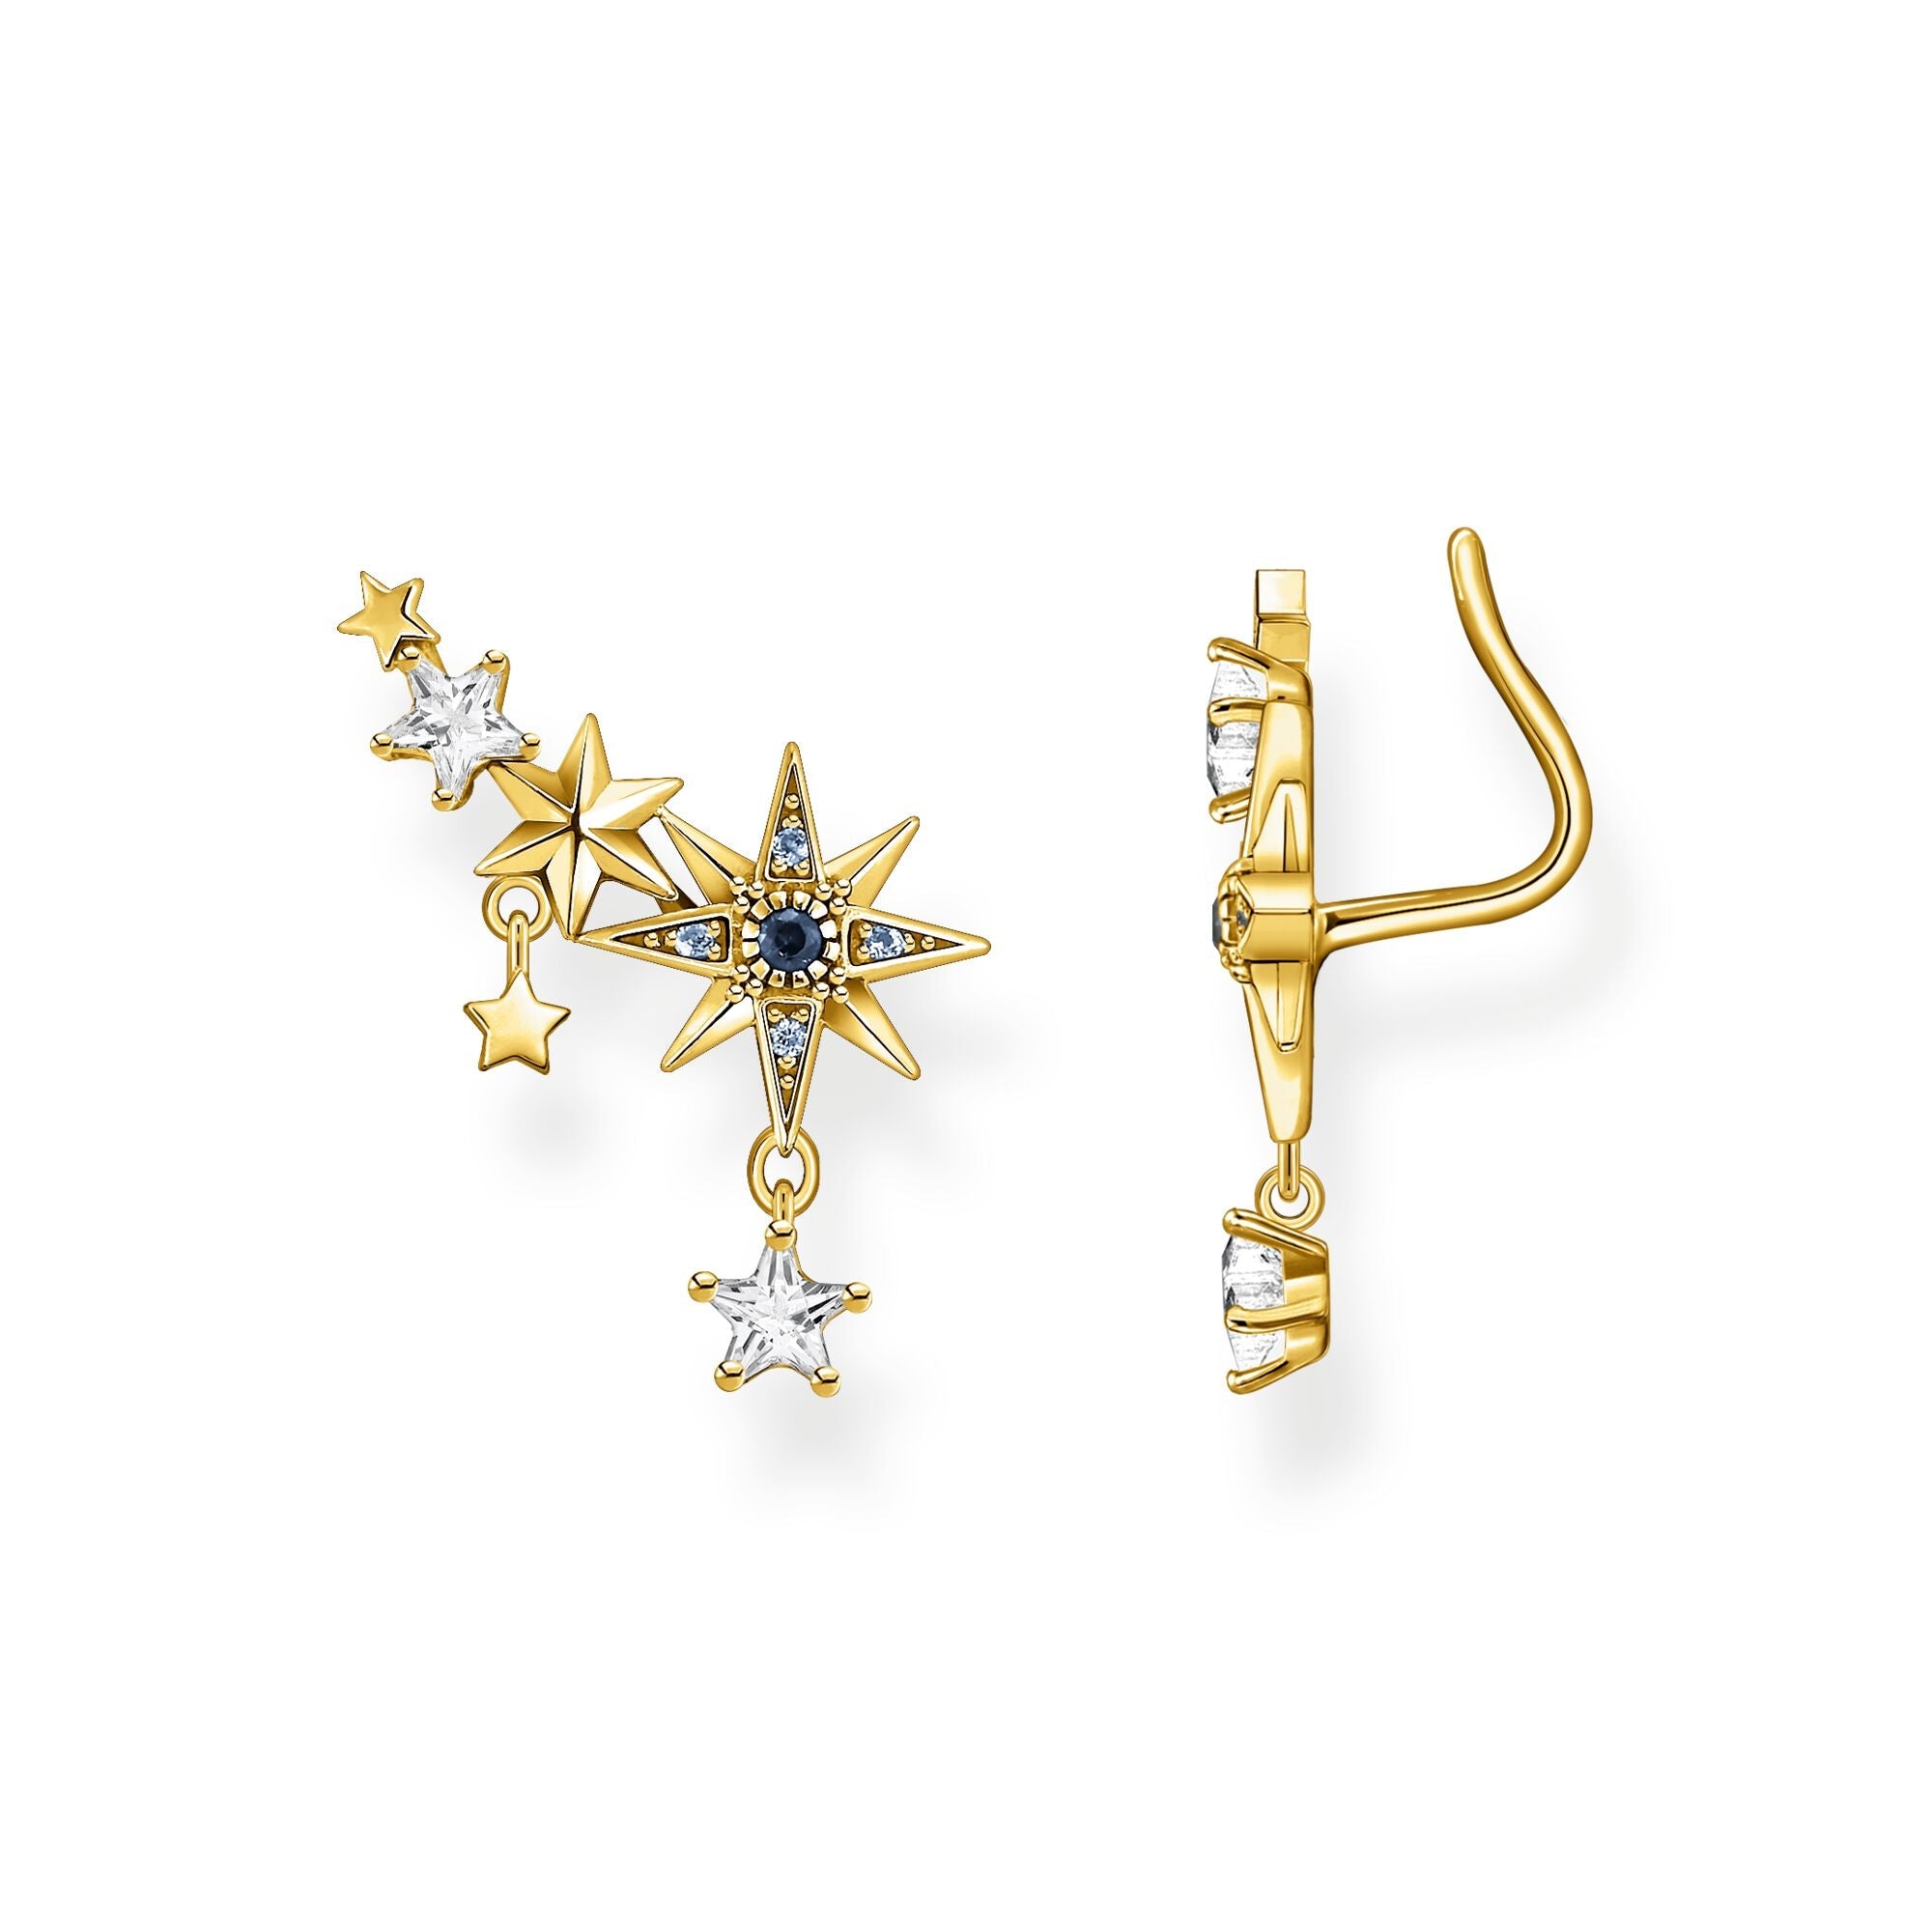 Thomas Sabo Royalty Gold Plated Sterling Silver Star Climber Earrings